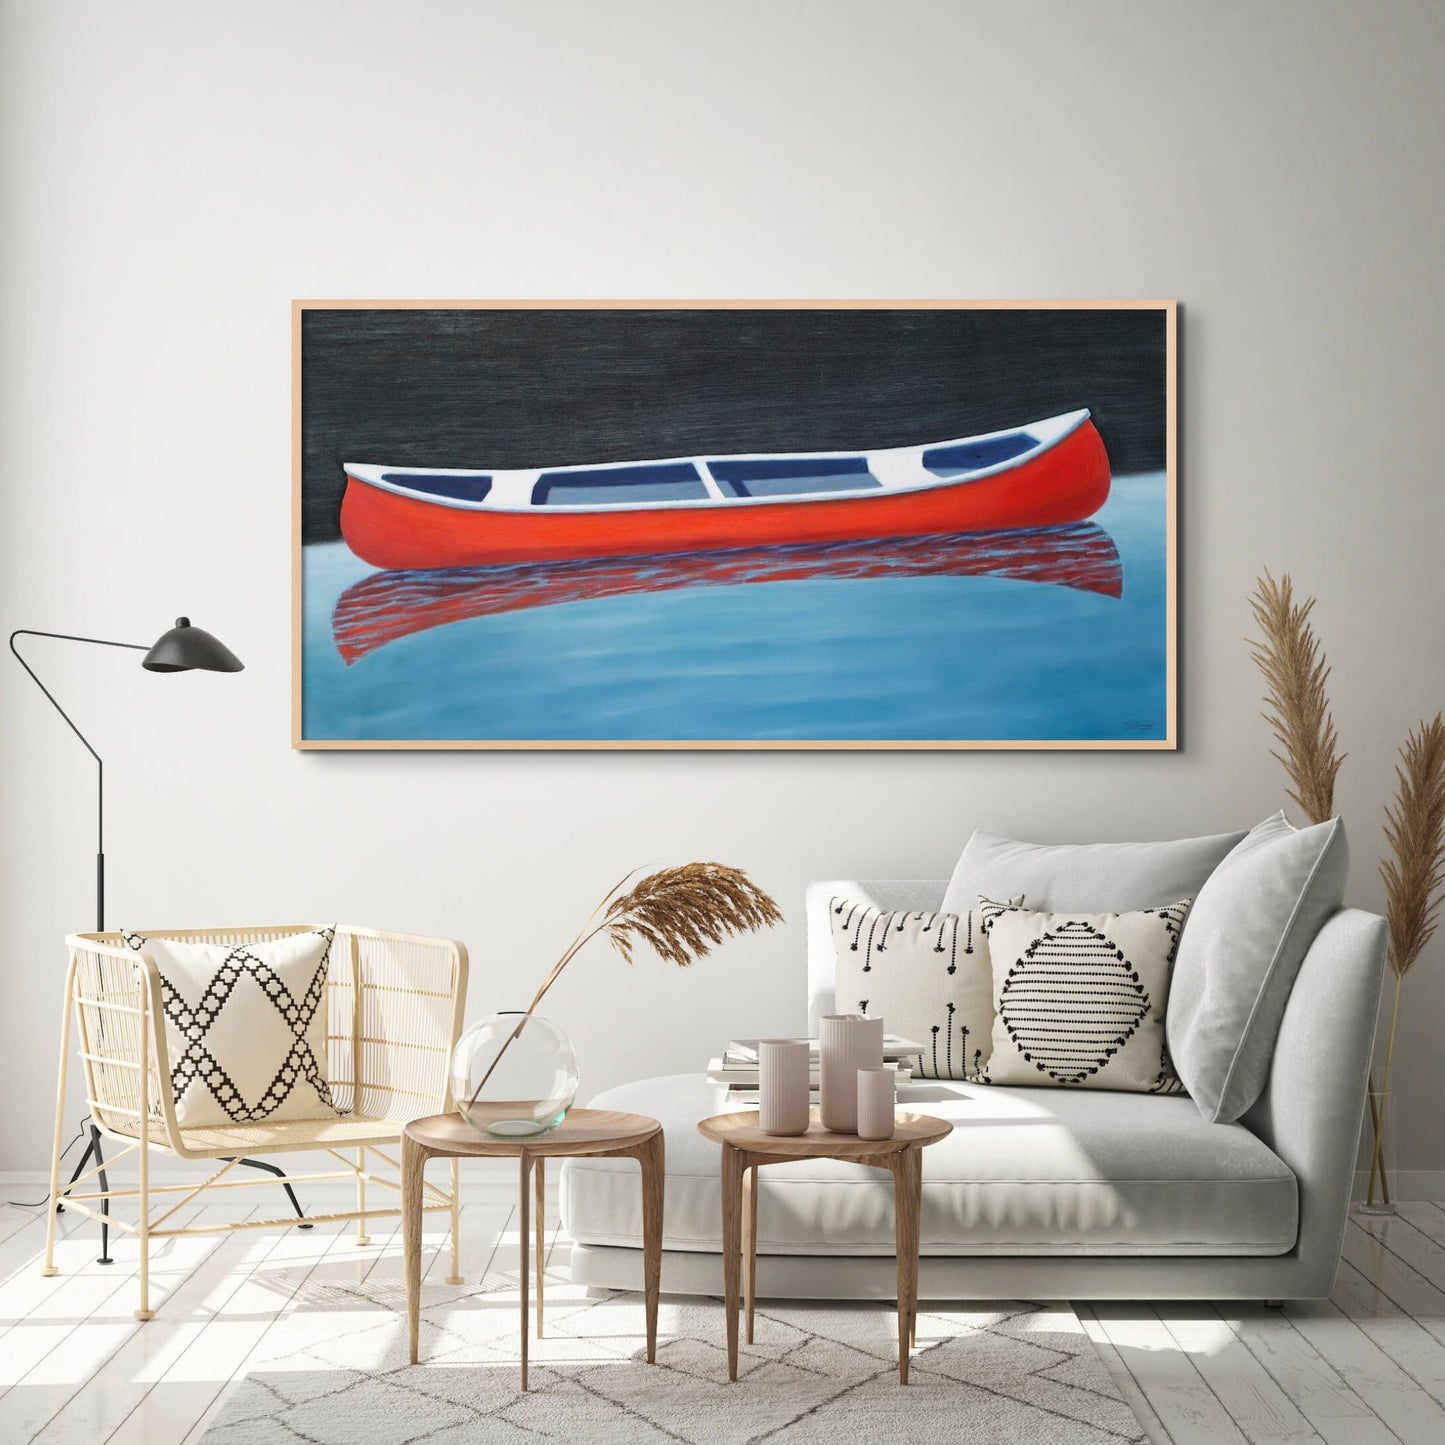 Canoe painting of a small red boat by Canadian artist Catherine McKinnon. The red canoe is floating on almost still blue water in the foreground and the background is pitch black. The giclee print is framed in light colored wood and is mounted on a light gray wall above a stylish contemporary chaise and living room set-up.